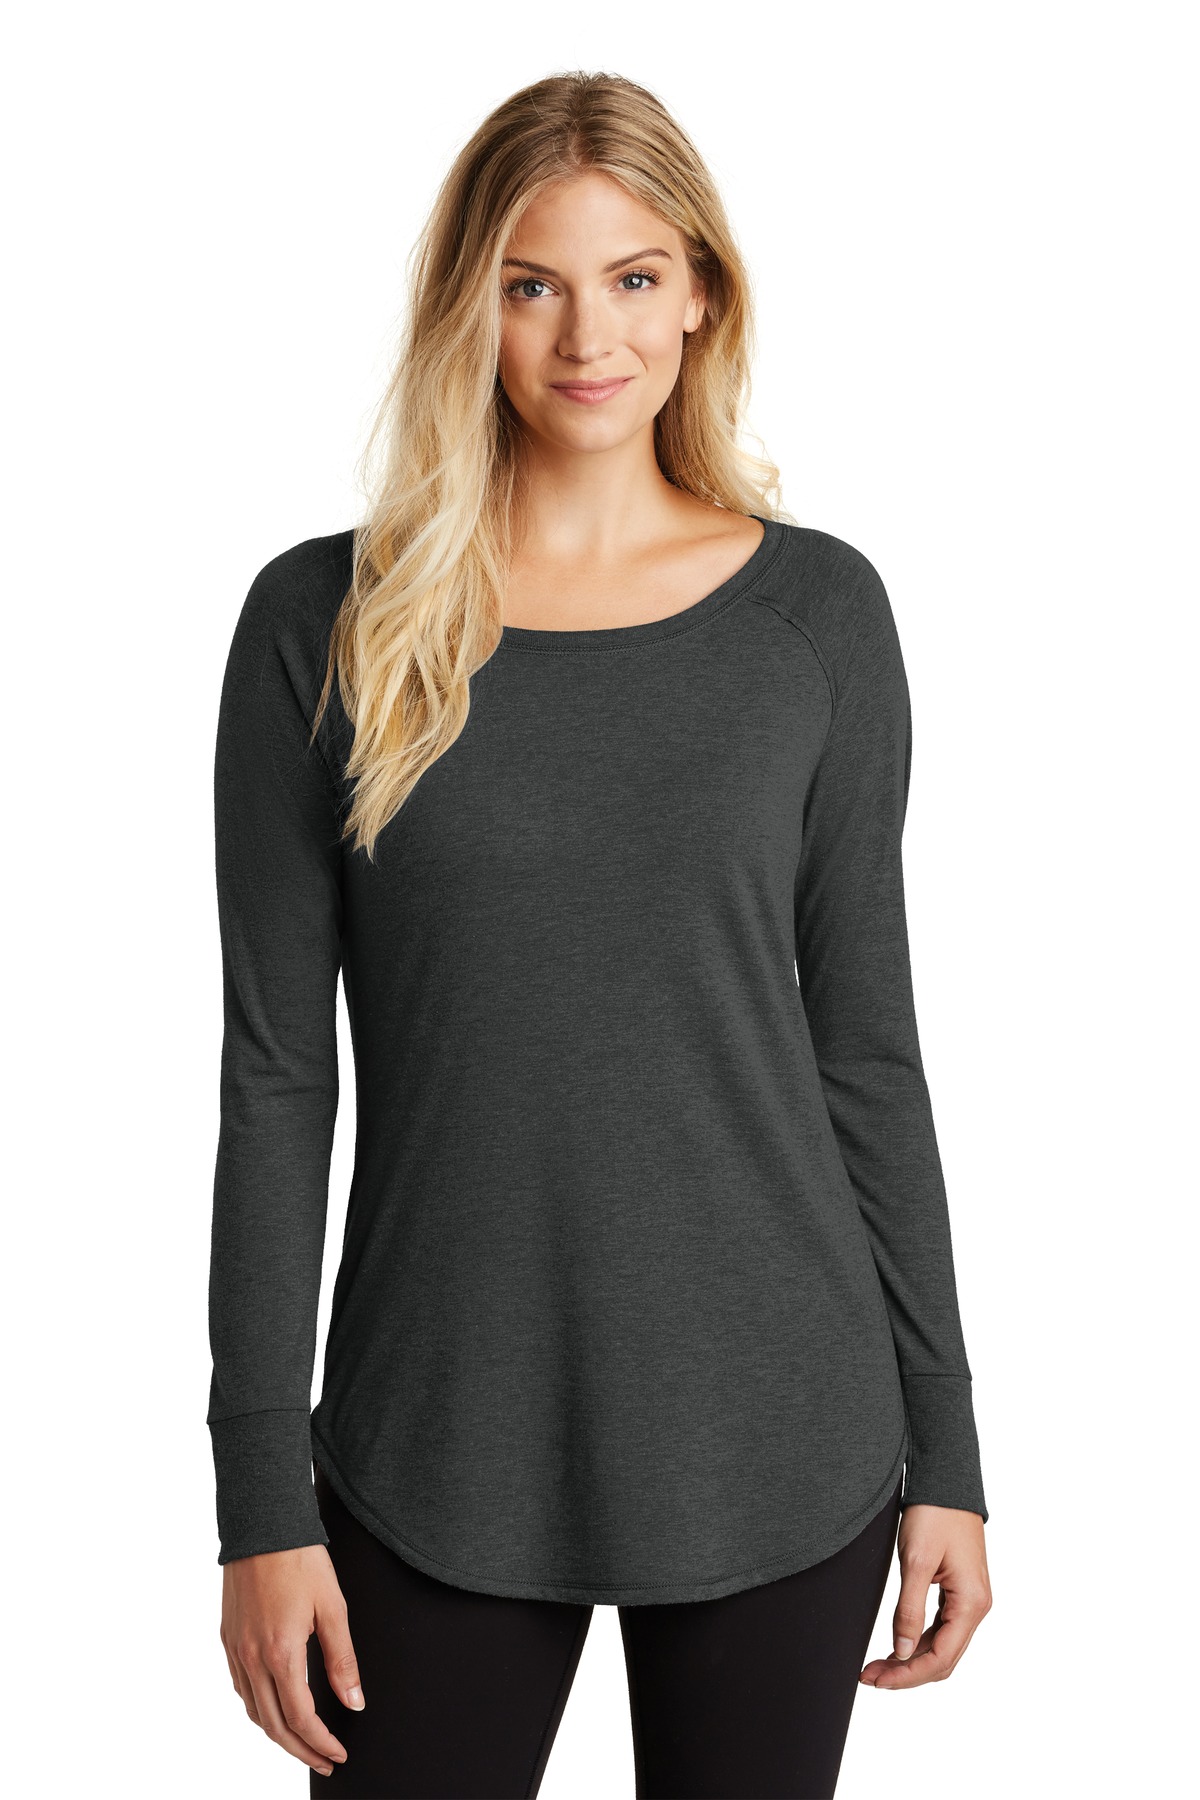 District  Womens Perfect Tri  Long Sleeve Tunic Tee. DT132L